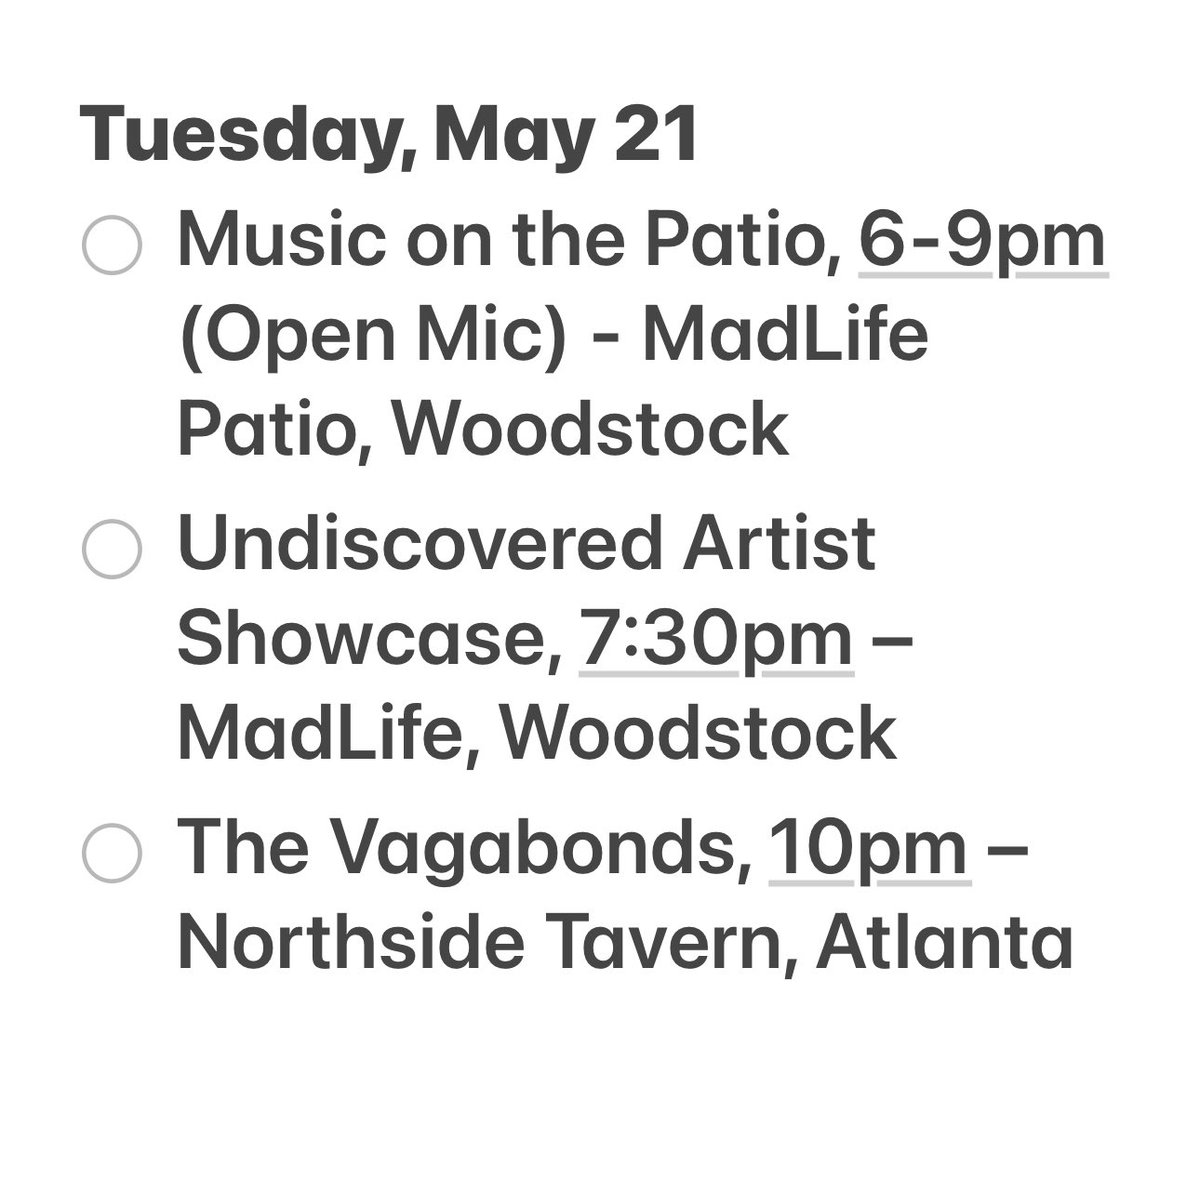 It a great day to get out to enjoy some live music!  Make your plans now! 🎶🎵💙💙🎵🎶 #atlantabluessociety #supportlivebluesvenues #supportliveblues #supportlivemusicvenues #supportlivemusic